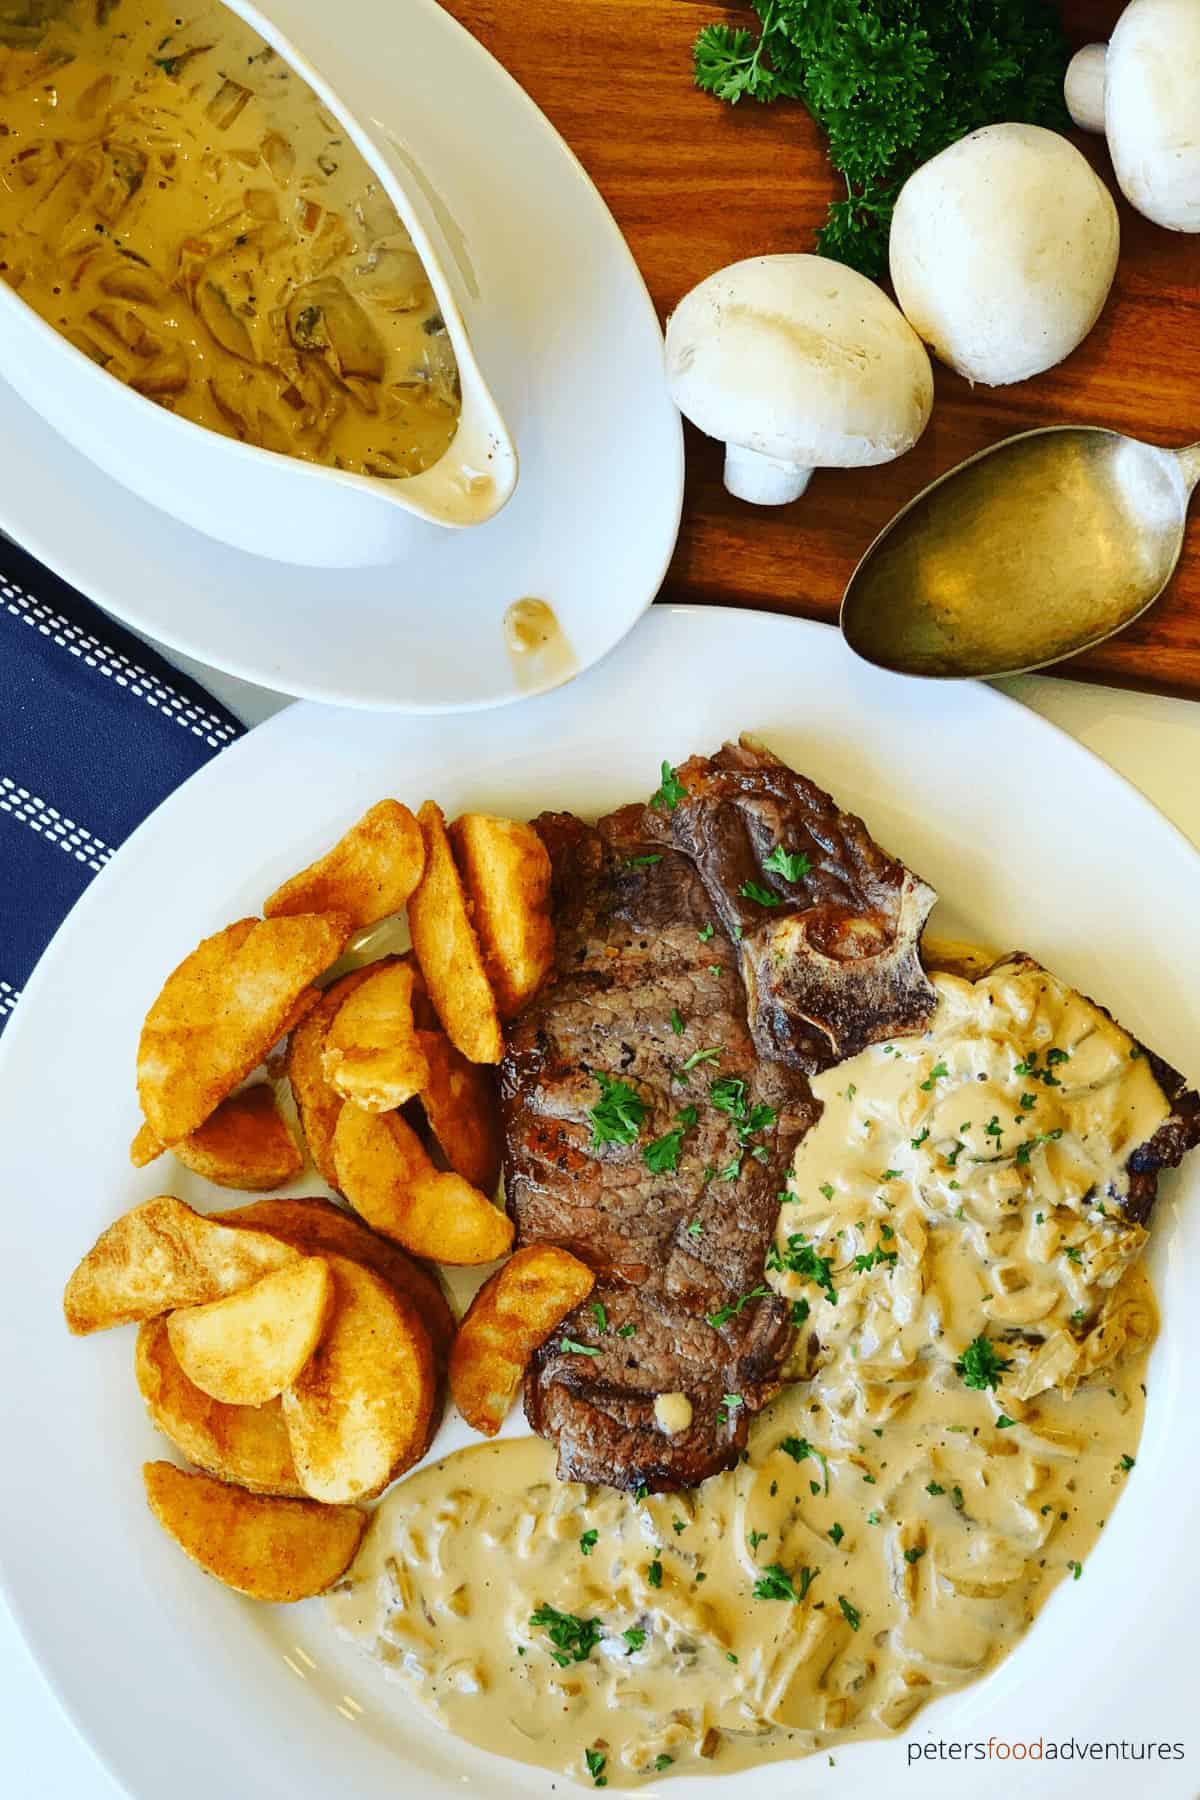 Diane Sauce is a creamy brandy steak sauce or mushroom gravy, with an easy to follow recipe. A classic American flambéed steak sauce, a flavor showstopper. A retro recipe popular in the 1950's.